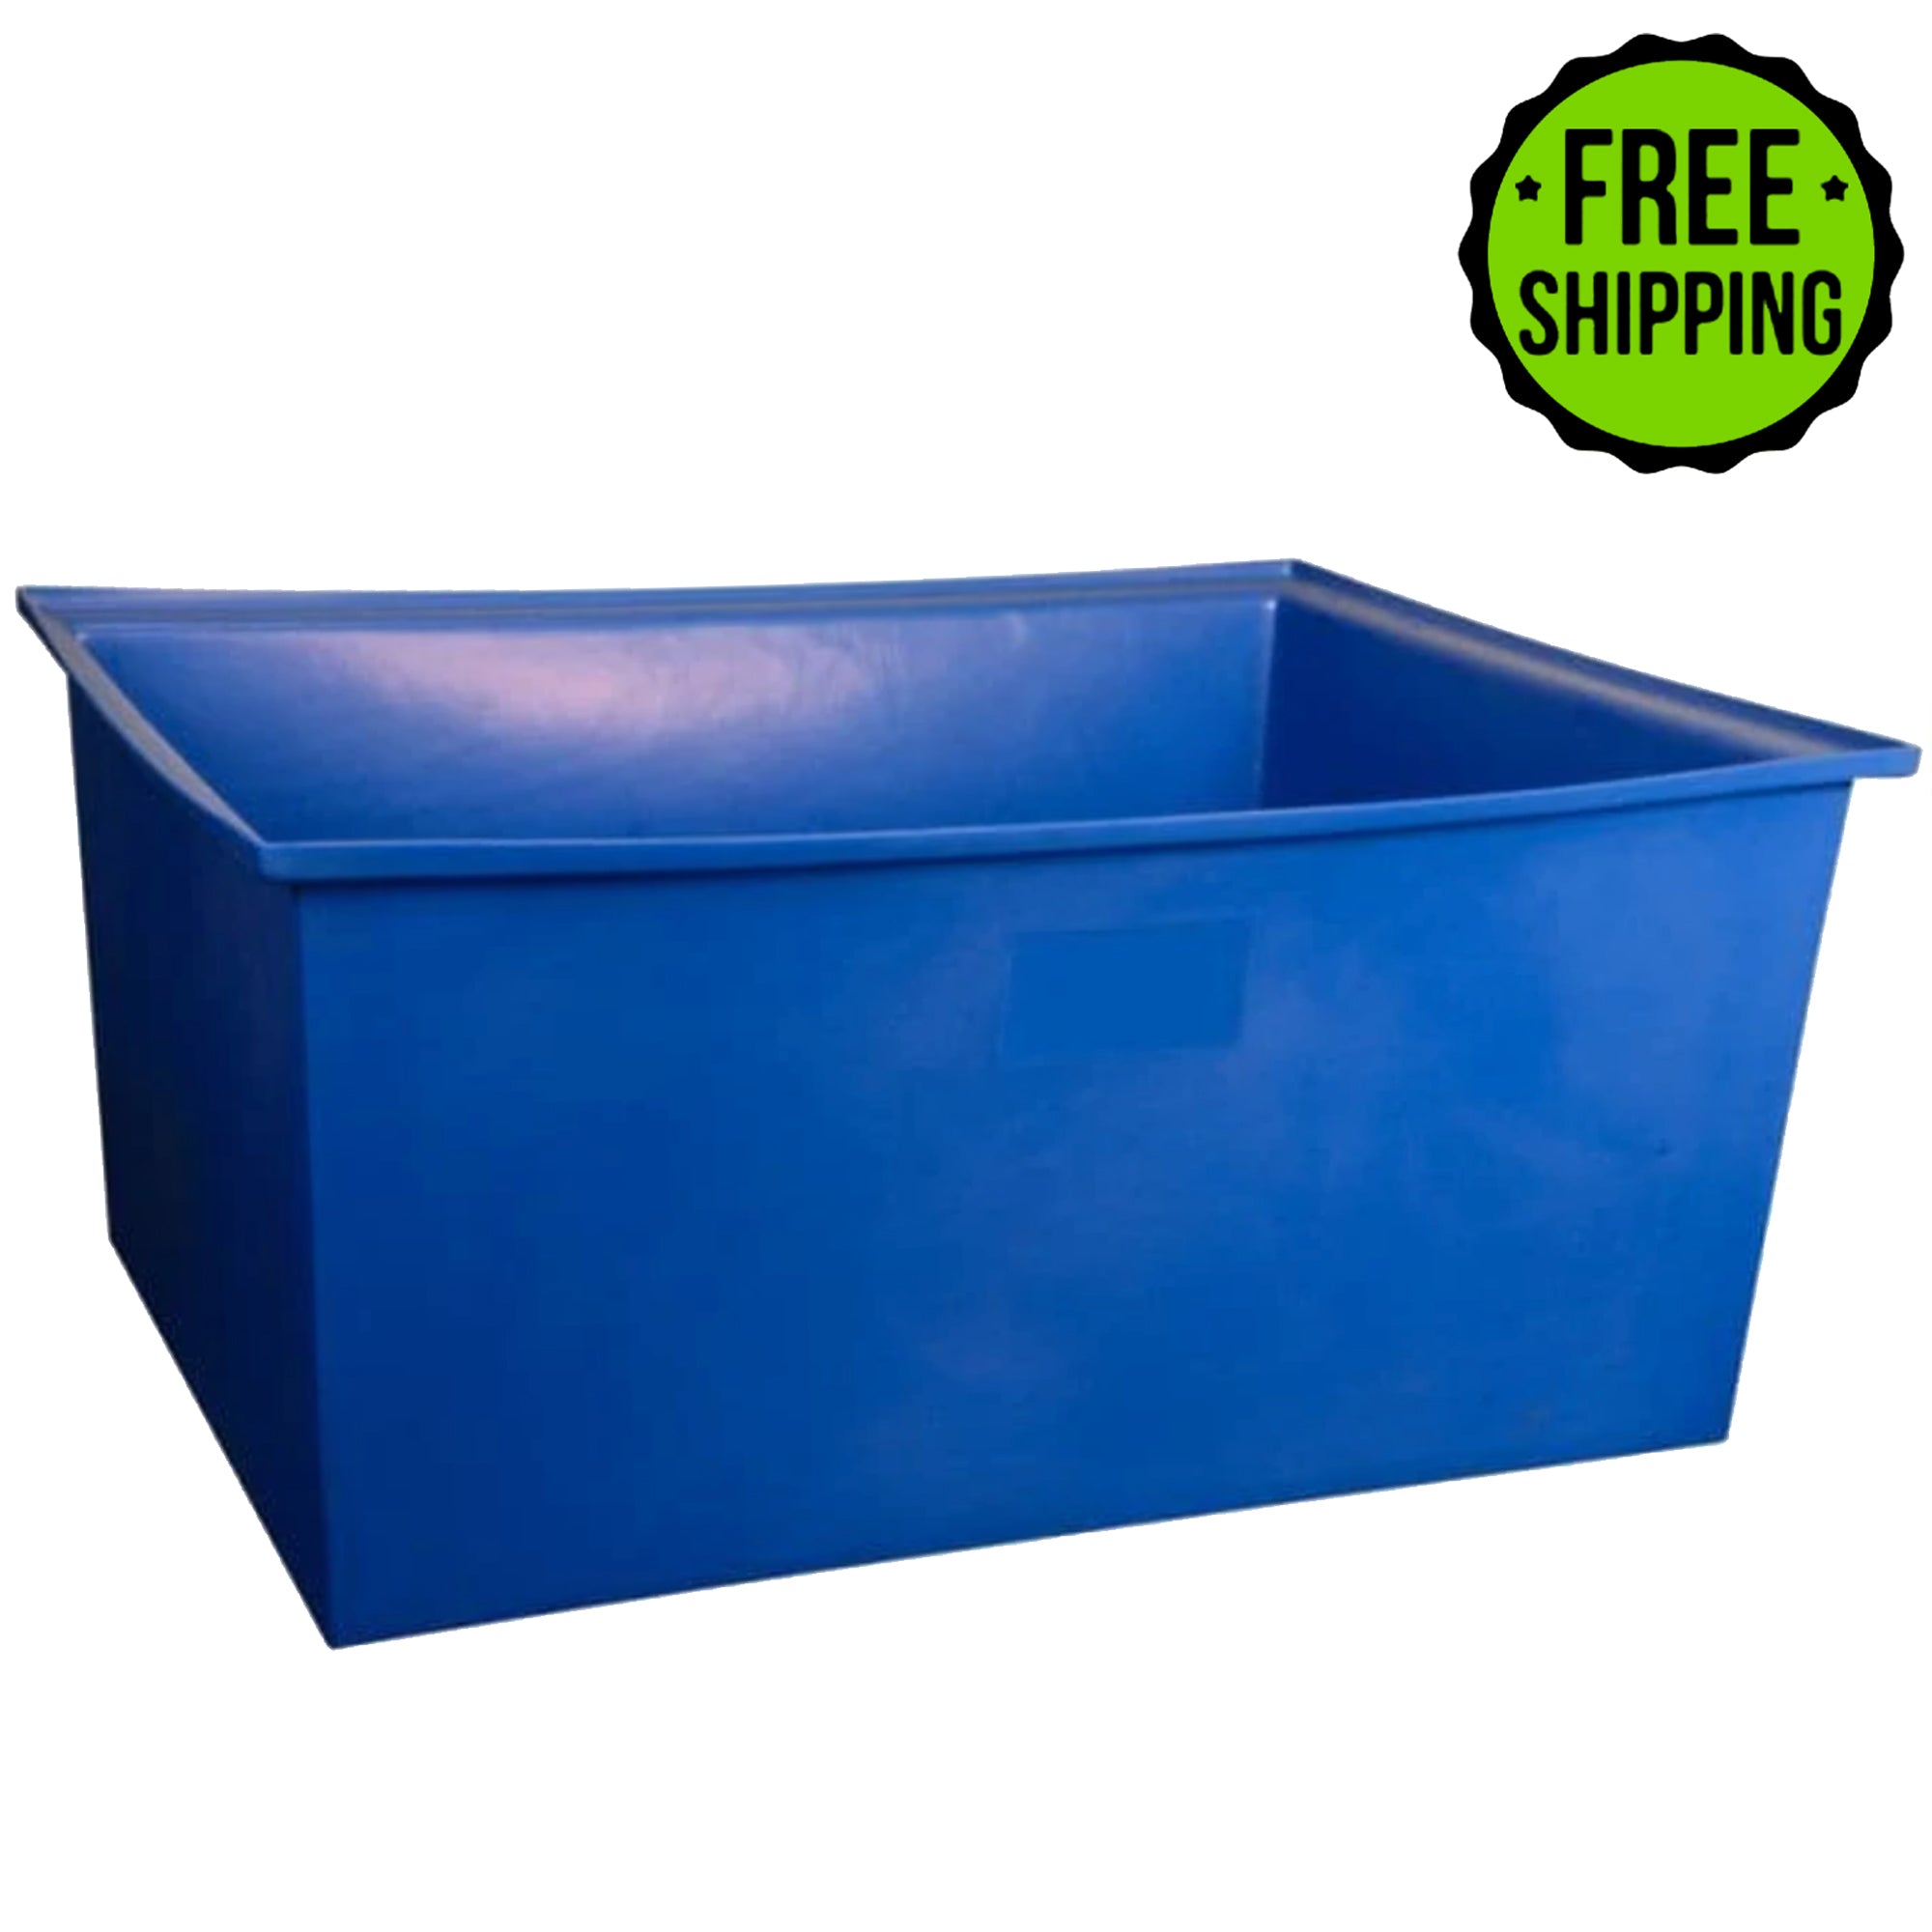 A blue plastic container, also known as a Pentair Rectangular Tank 150 Gallons, with the words "free shipping".